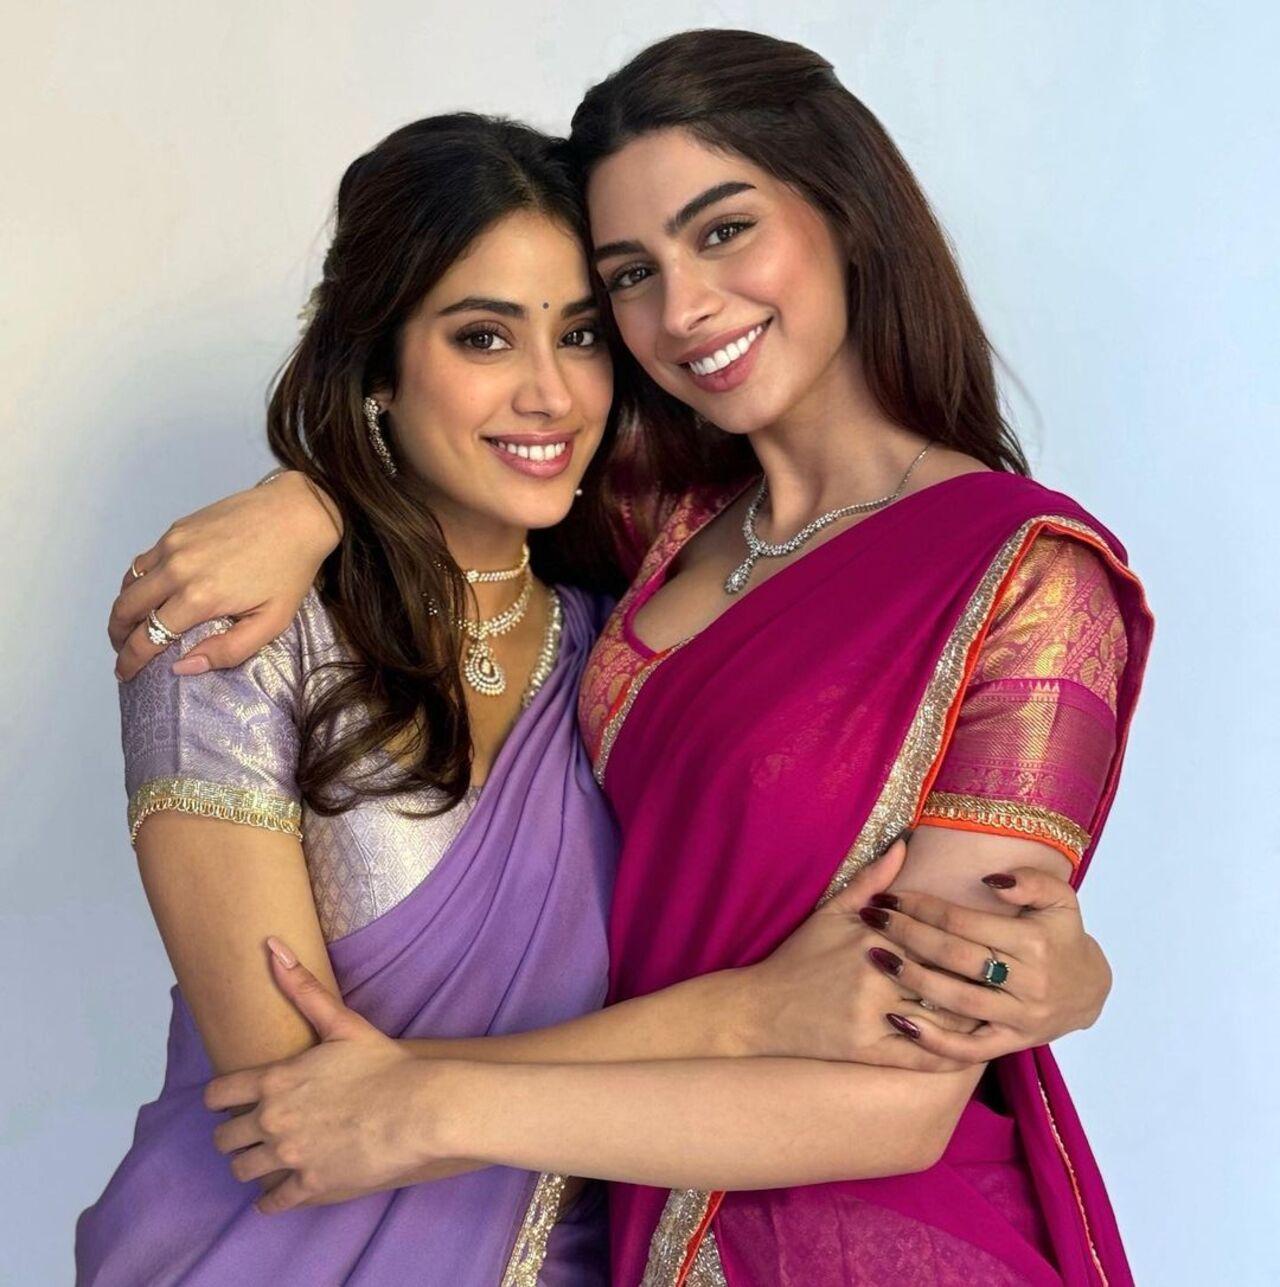 Janhvi Kapoor looked gorgeous in a purple and silver half-saree whereas Khushi Kapoor was dressed in a pink and orange half-saree for Dhanteras puja at Dharma Productions